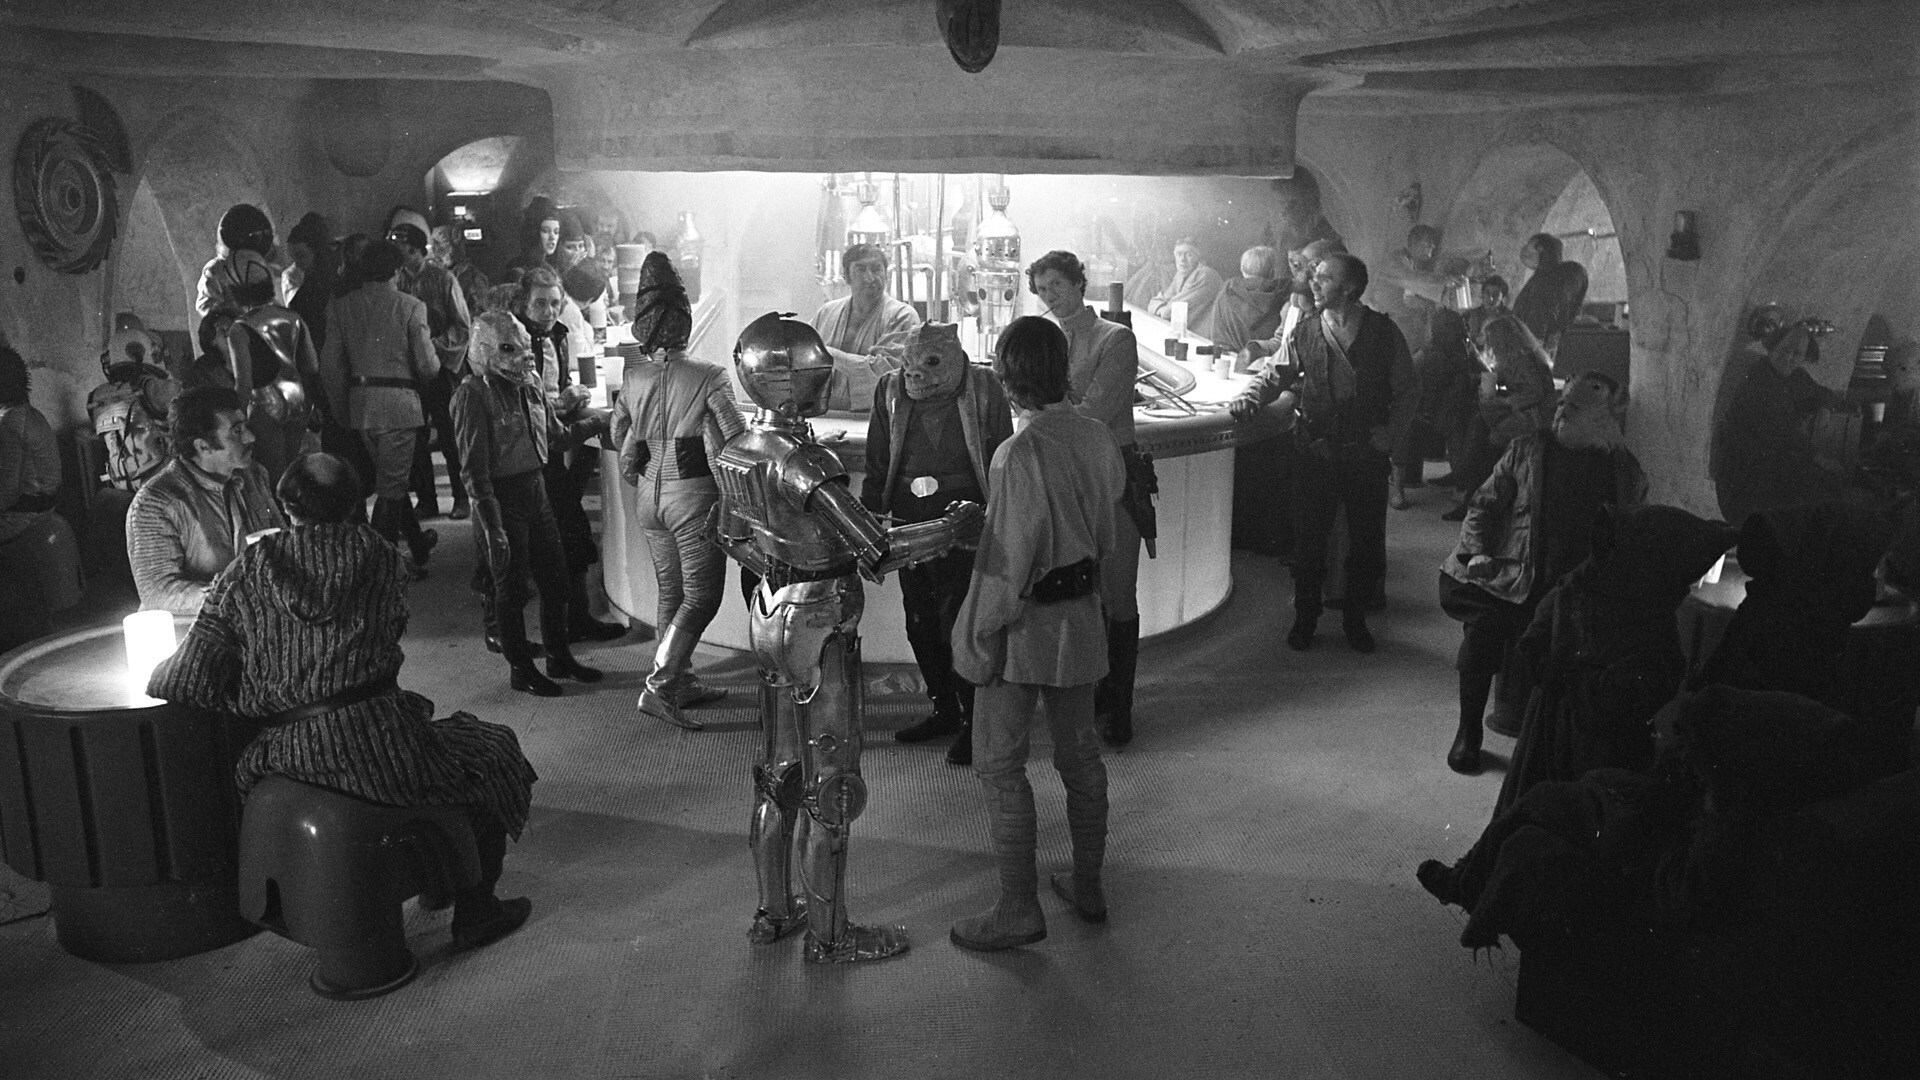 Poll: Who Is Your Favorite Mos Eisley Cantina Patron?